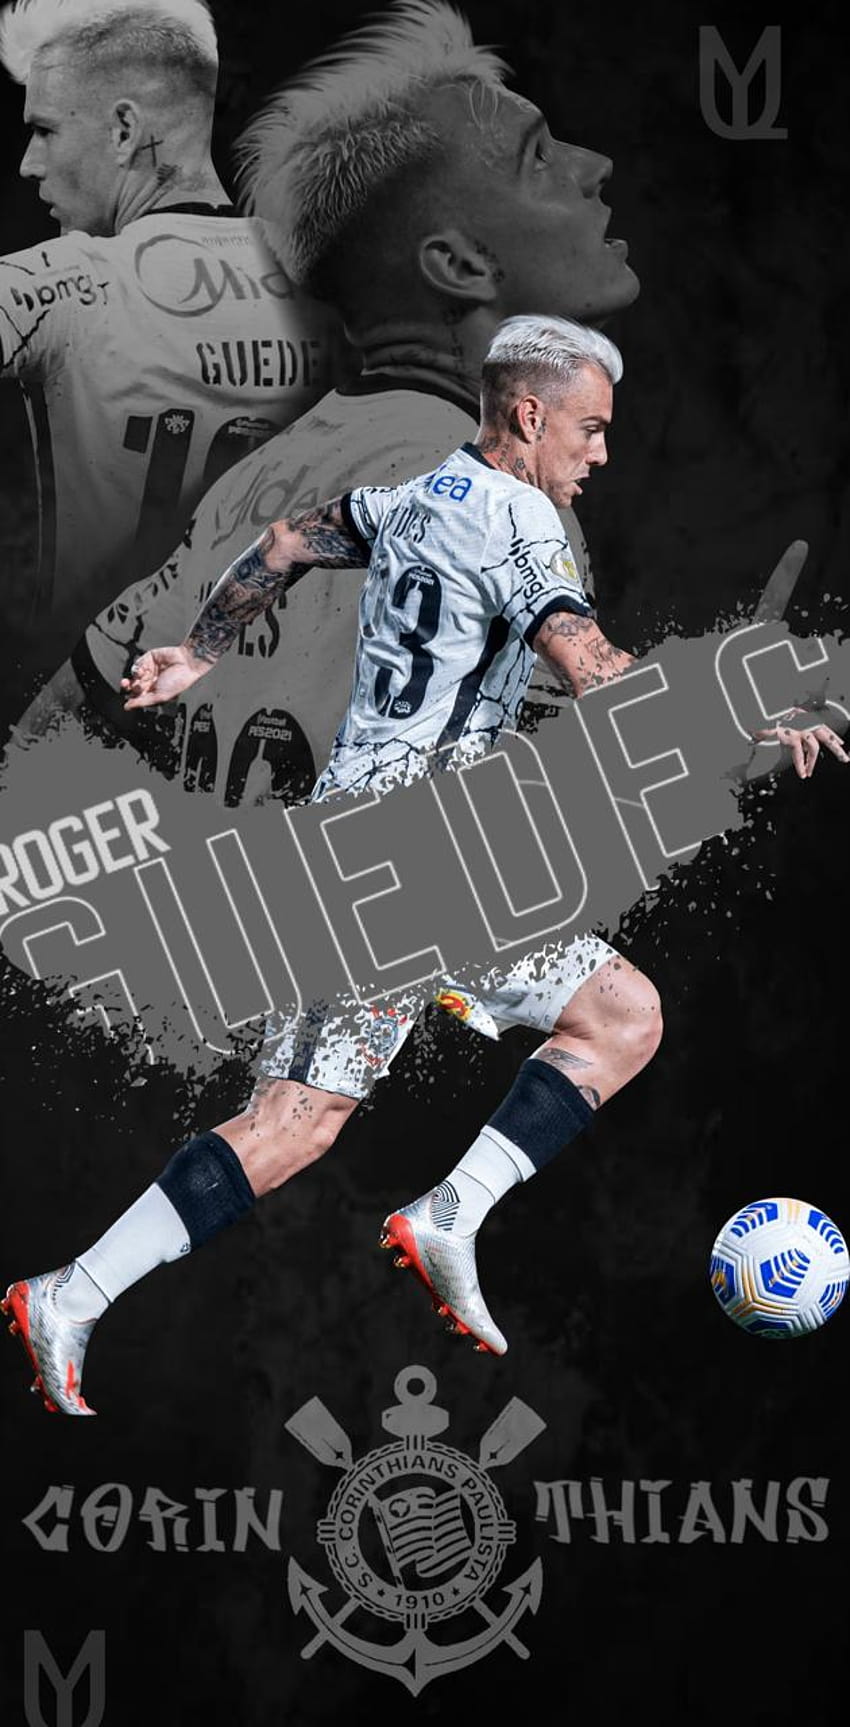 Roger Guedes by Ulycrack HD phone wallpaper